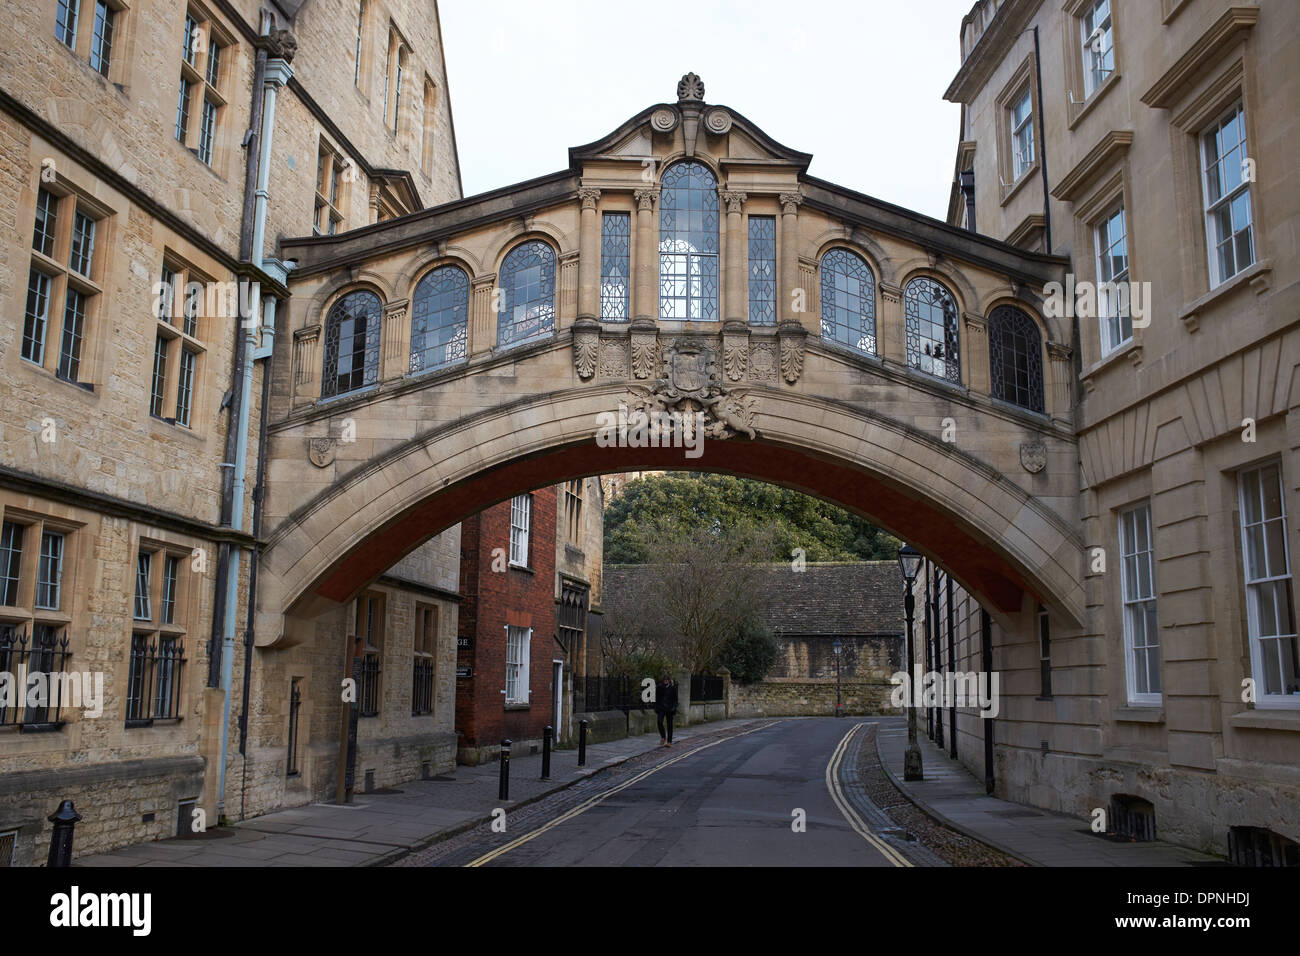 The Bridge of Sighs in Oxford city centre UK Stock Photo